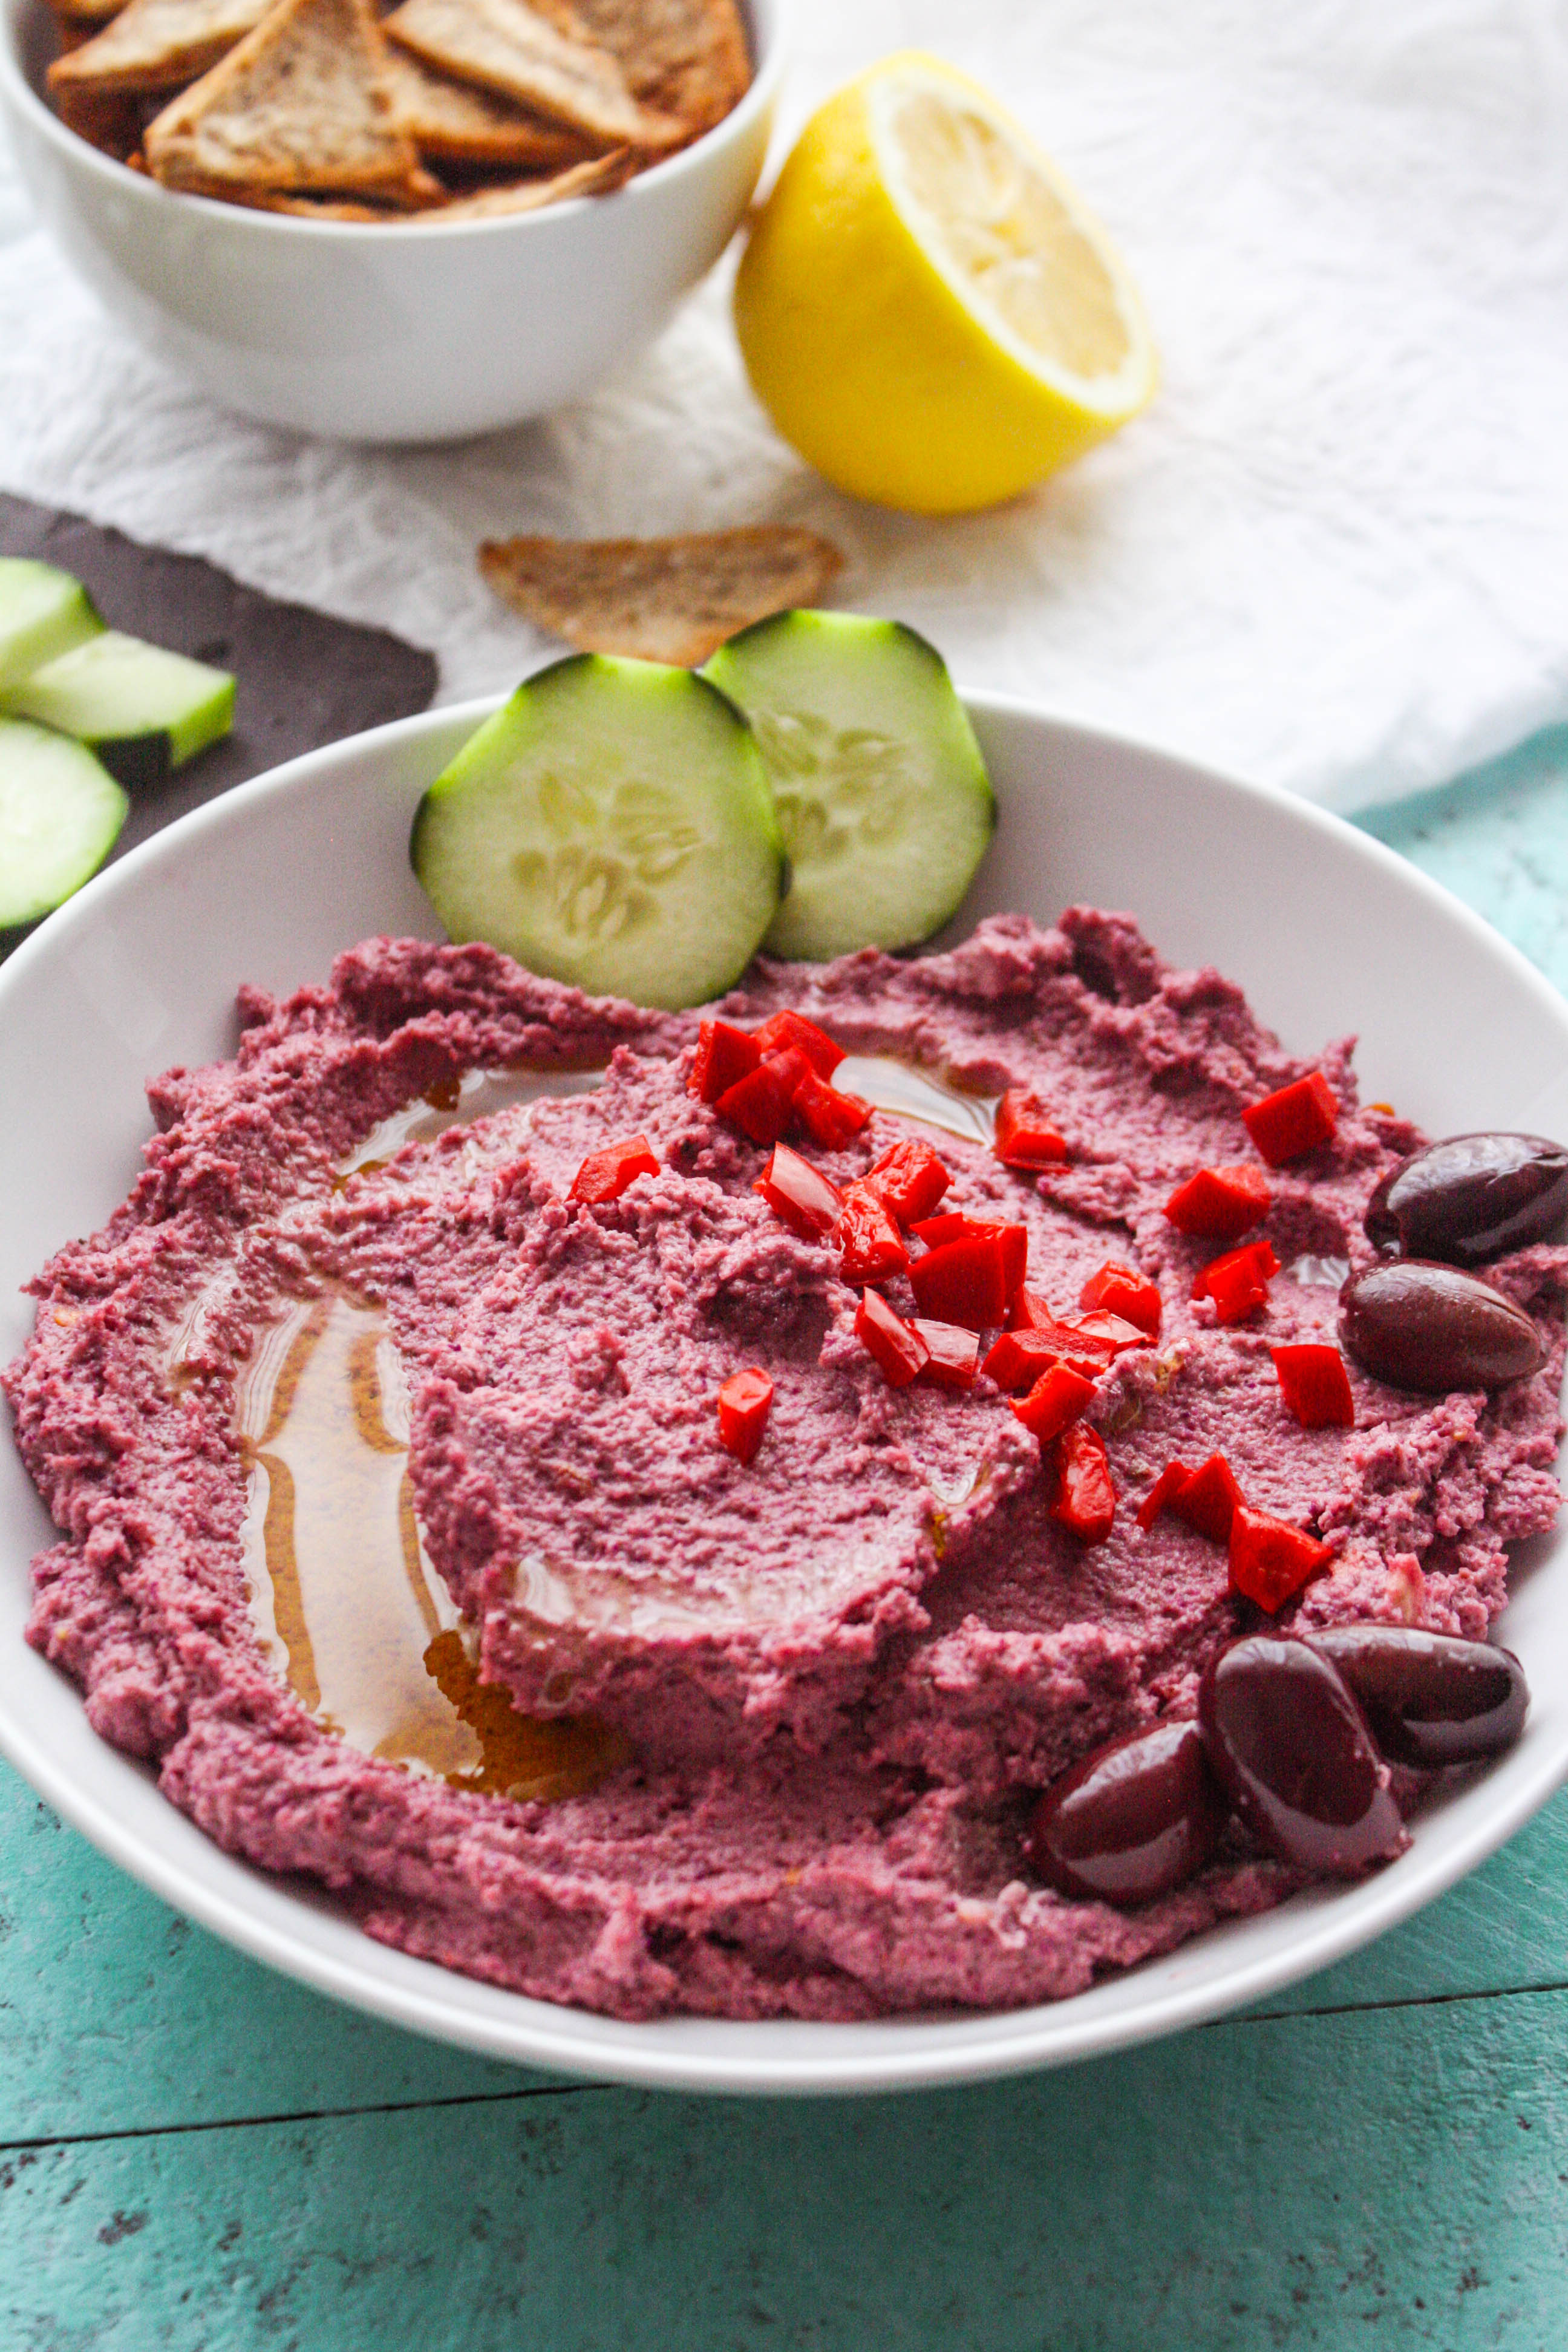 Roasted Garlic and Purple Cauliflower Hummus is a tasty dip that's perfect as a snack or appetizer. Roasted Garlic and Purple Cauliflower Hummus is a fun treat for any day.